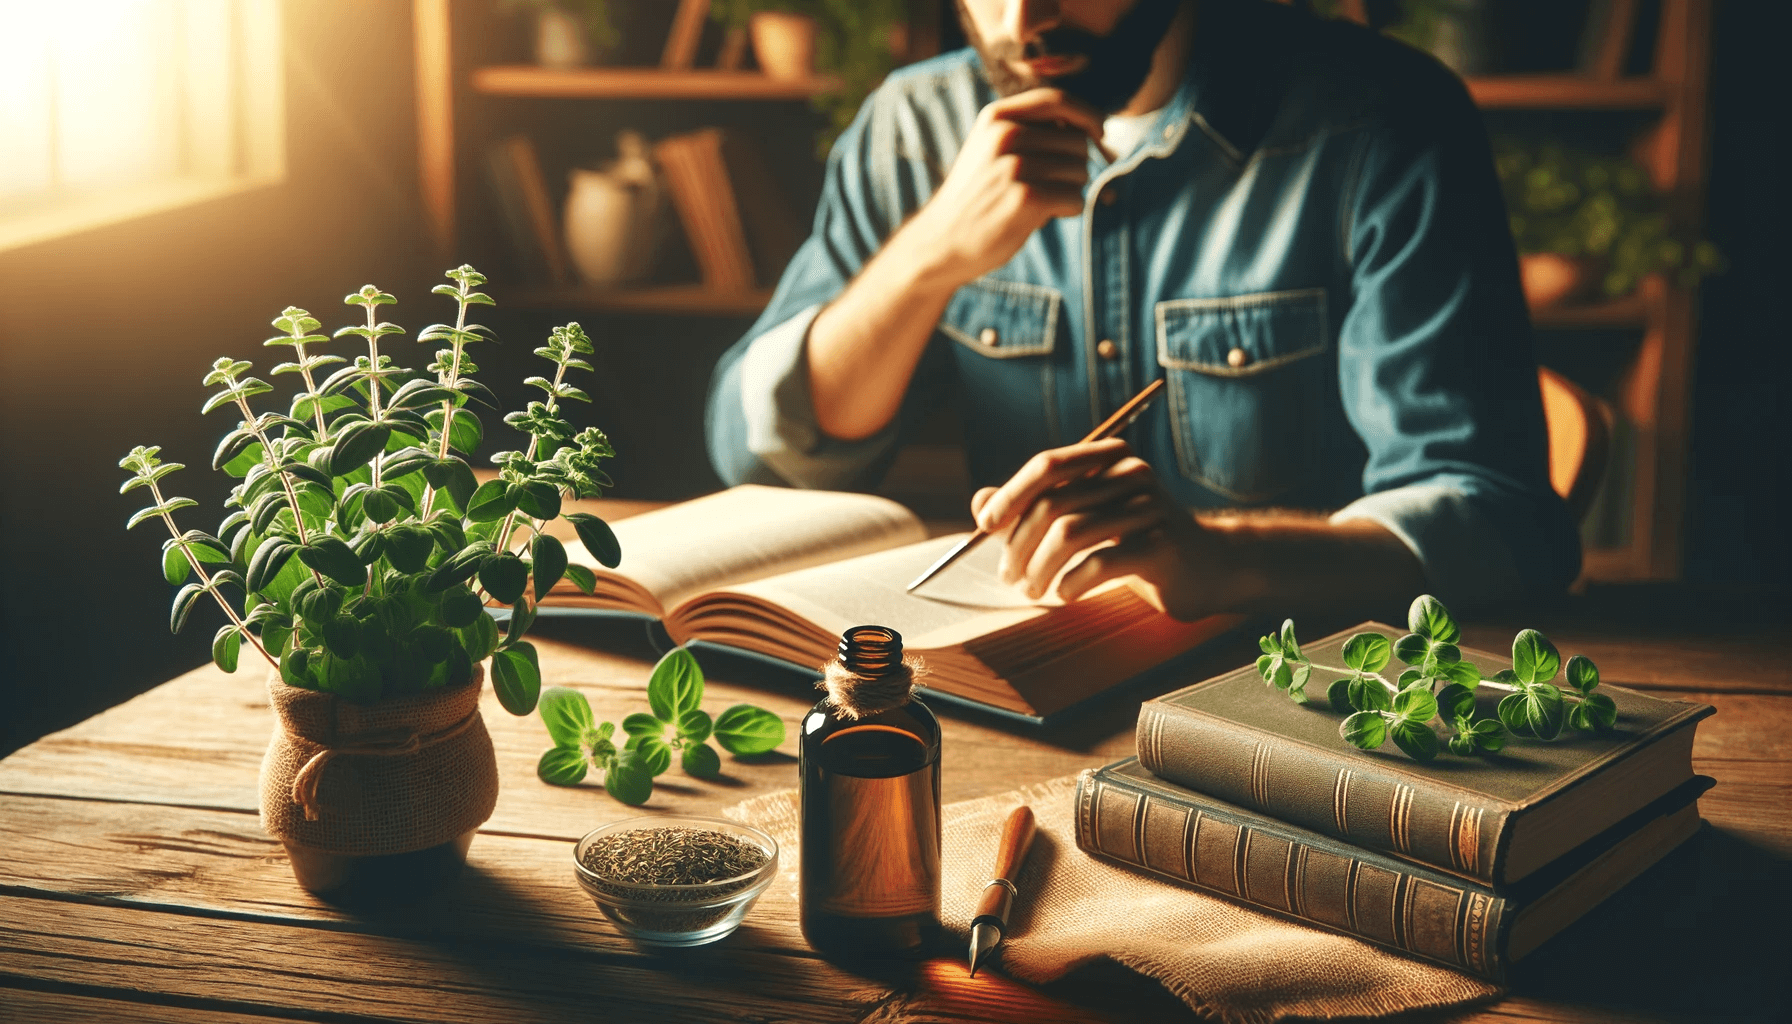 A person consulting a book on herbal remedies with a focus on oregano oil. The person is depicted in a thoughtful pose reading.